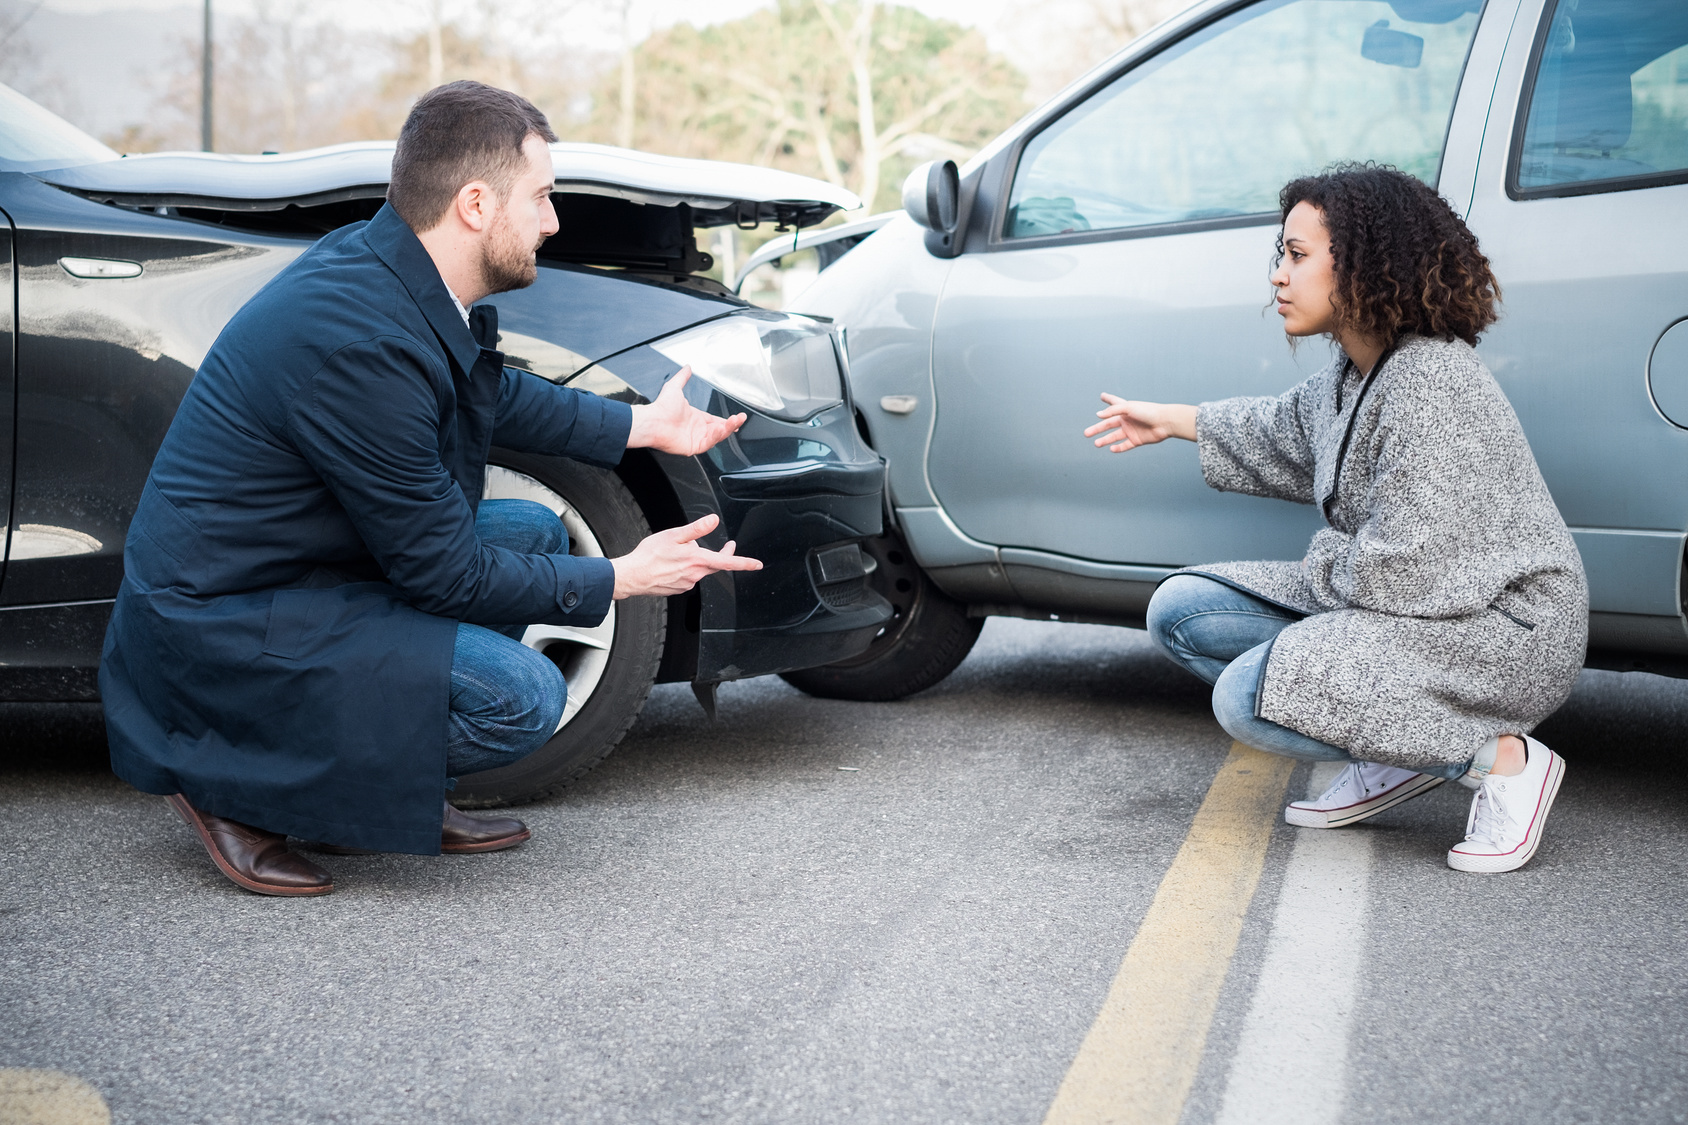 What You Need to Know Before Hiring a Car Accident Lawyer